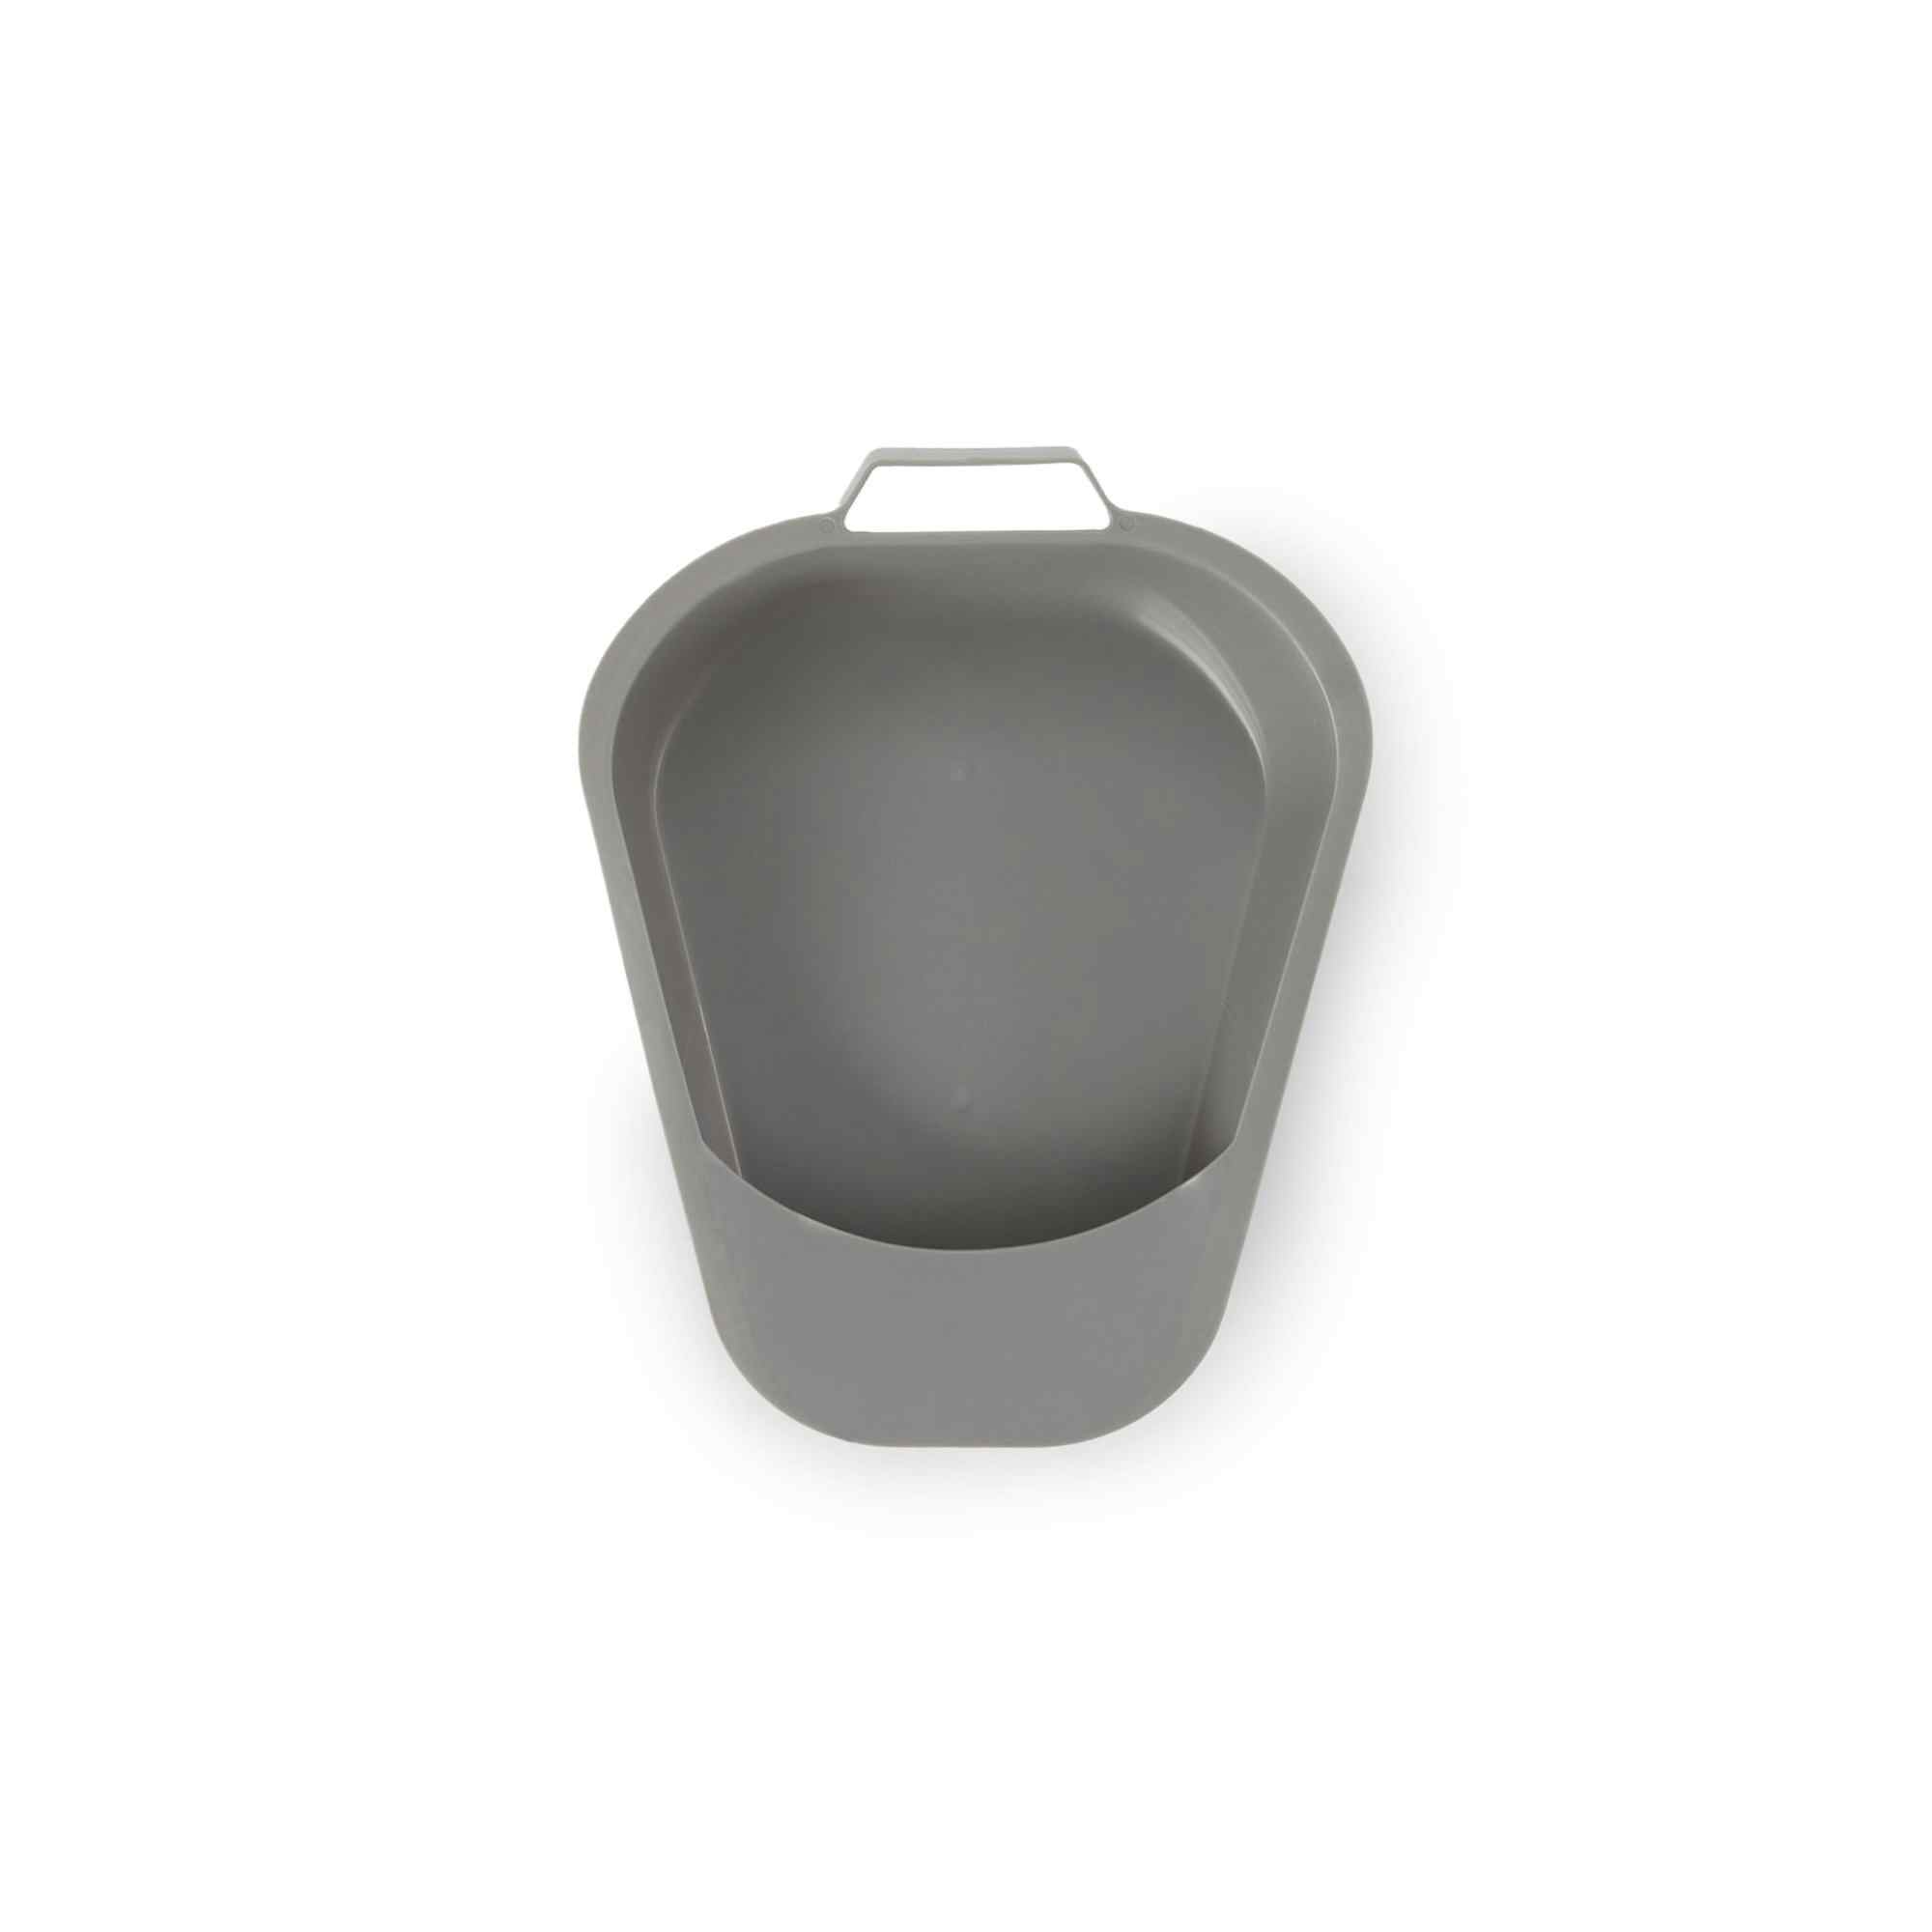 Image of McKesson Fracture Bedpan product top